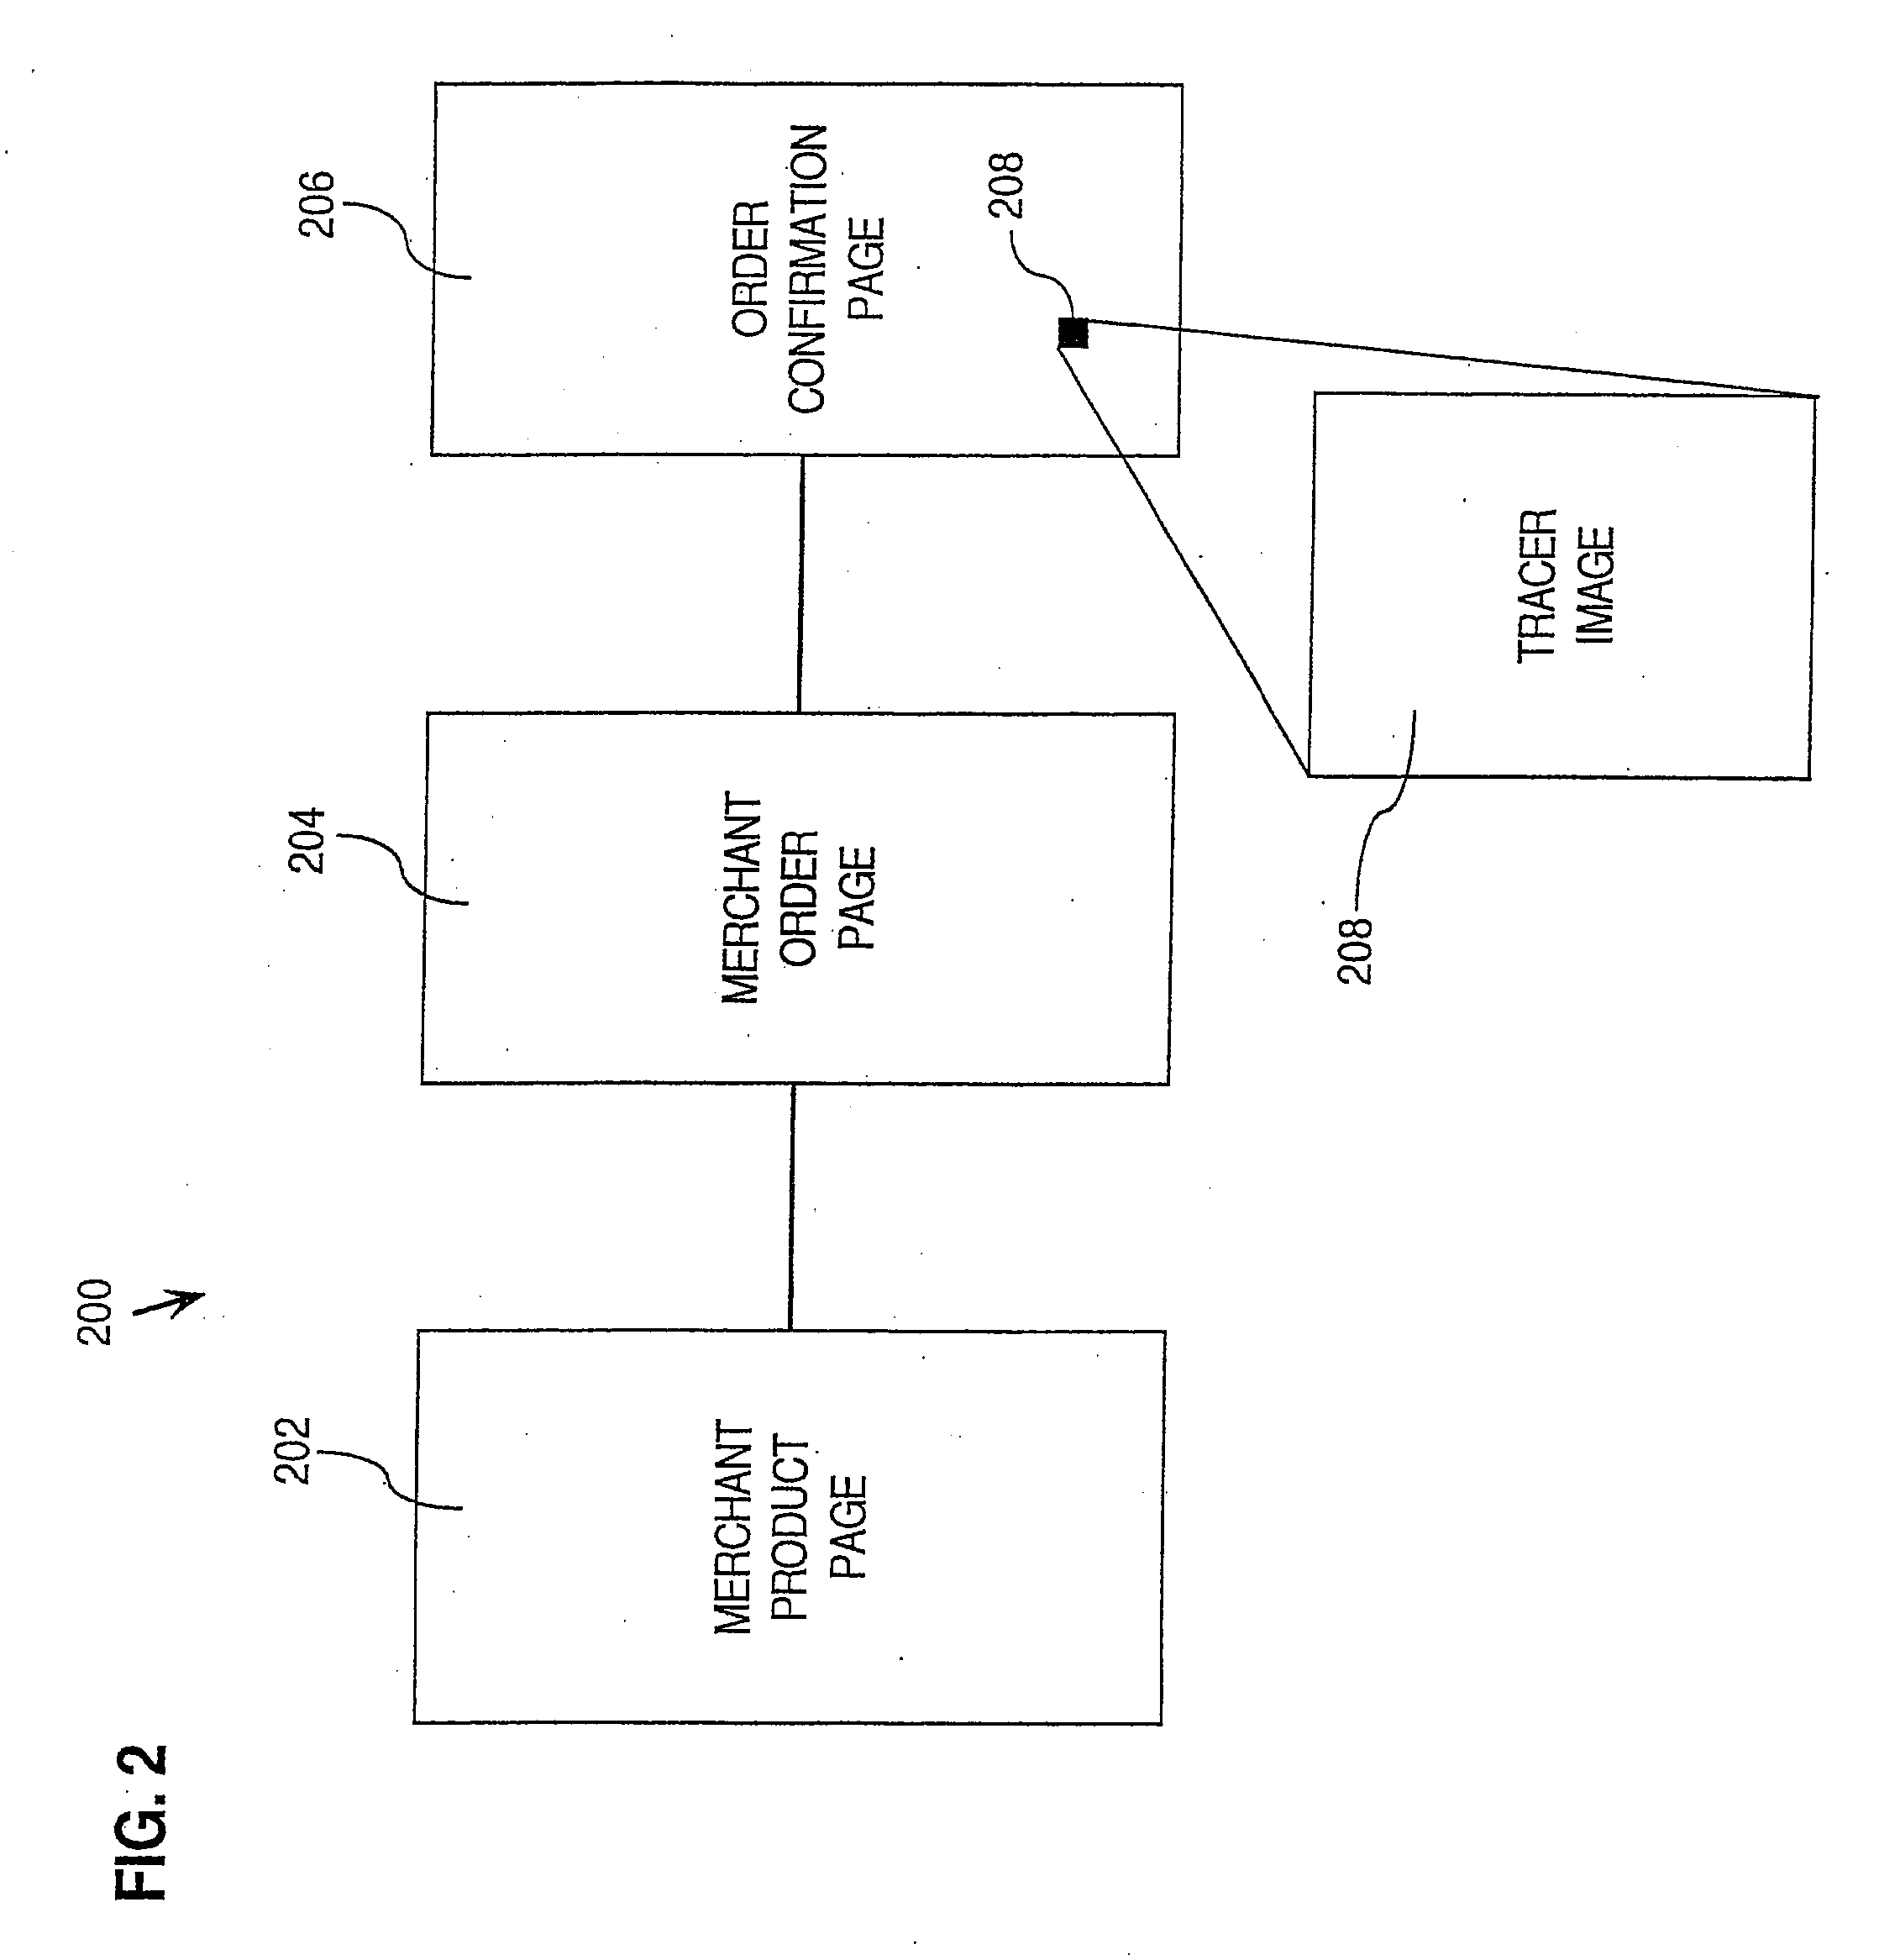 Providing navigation objects for communications over a network